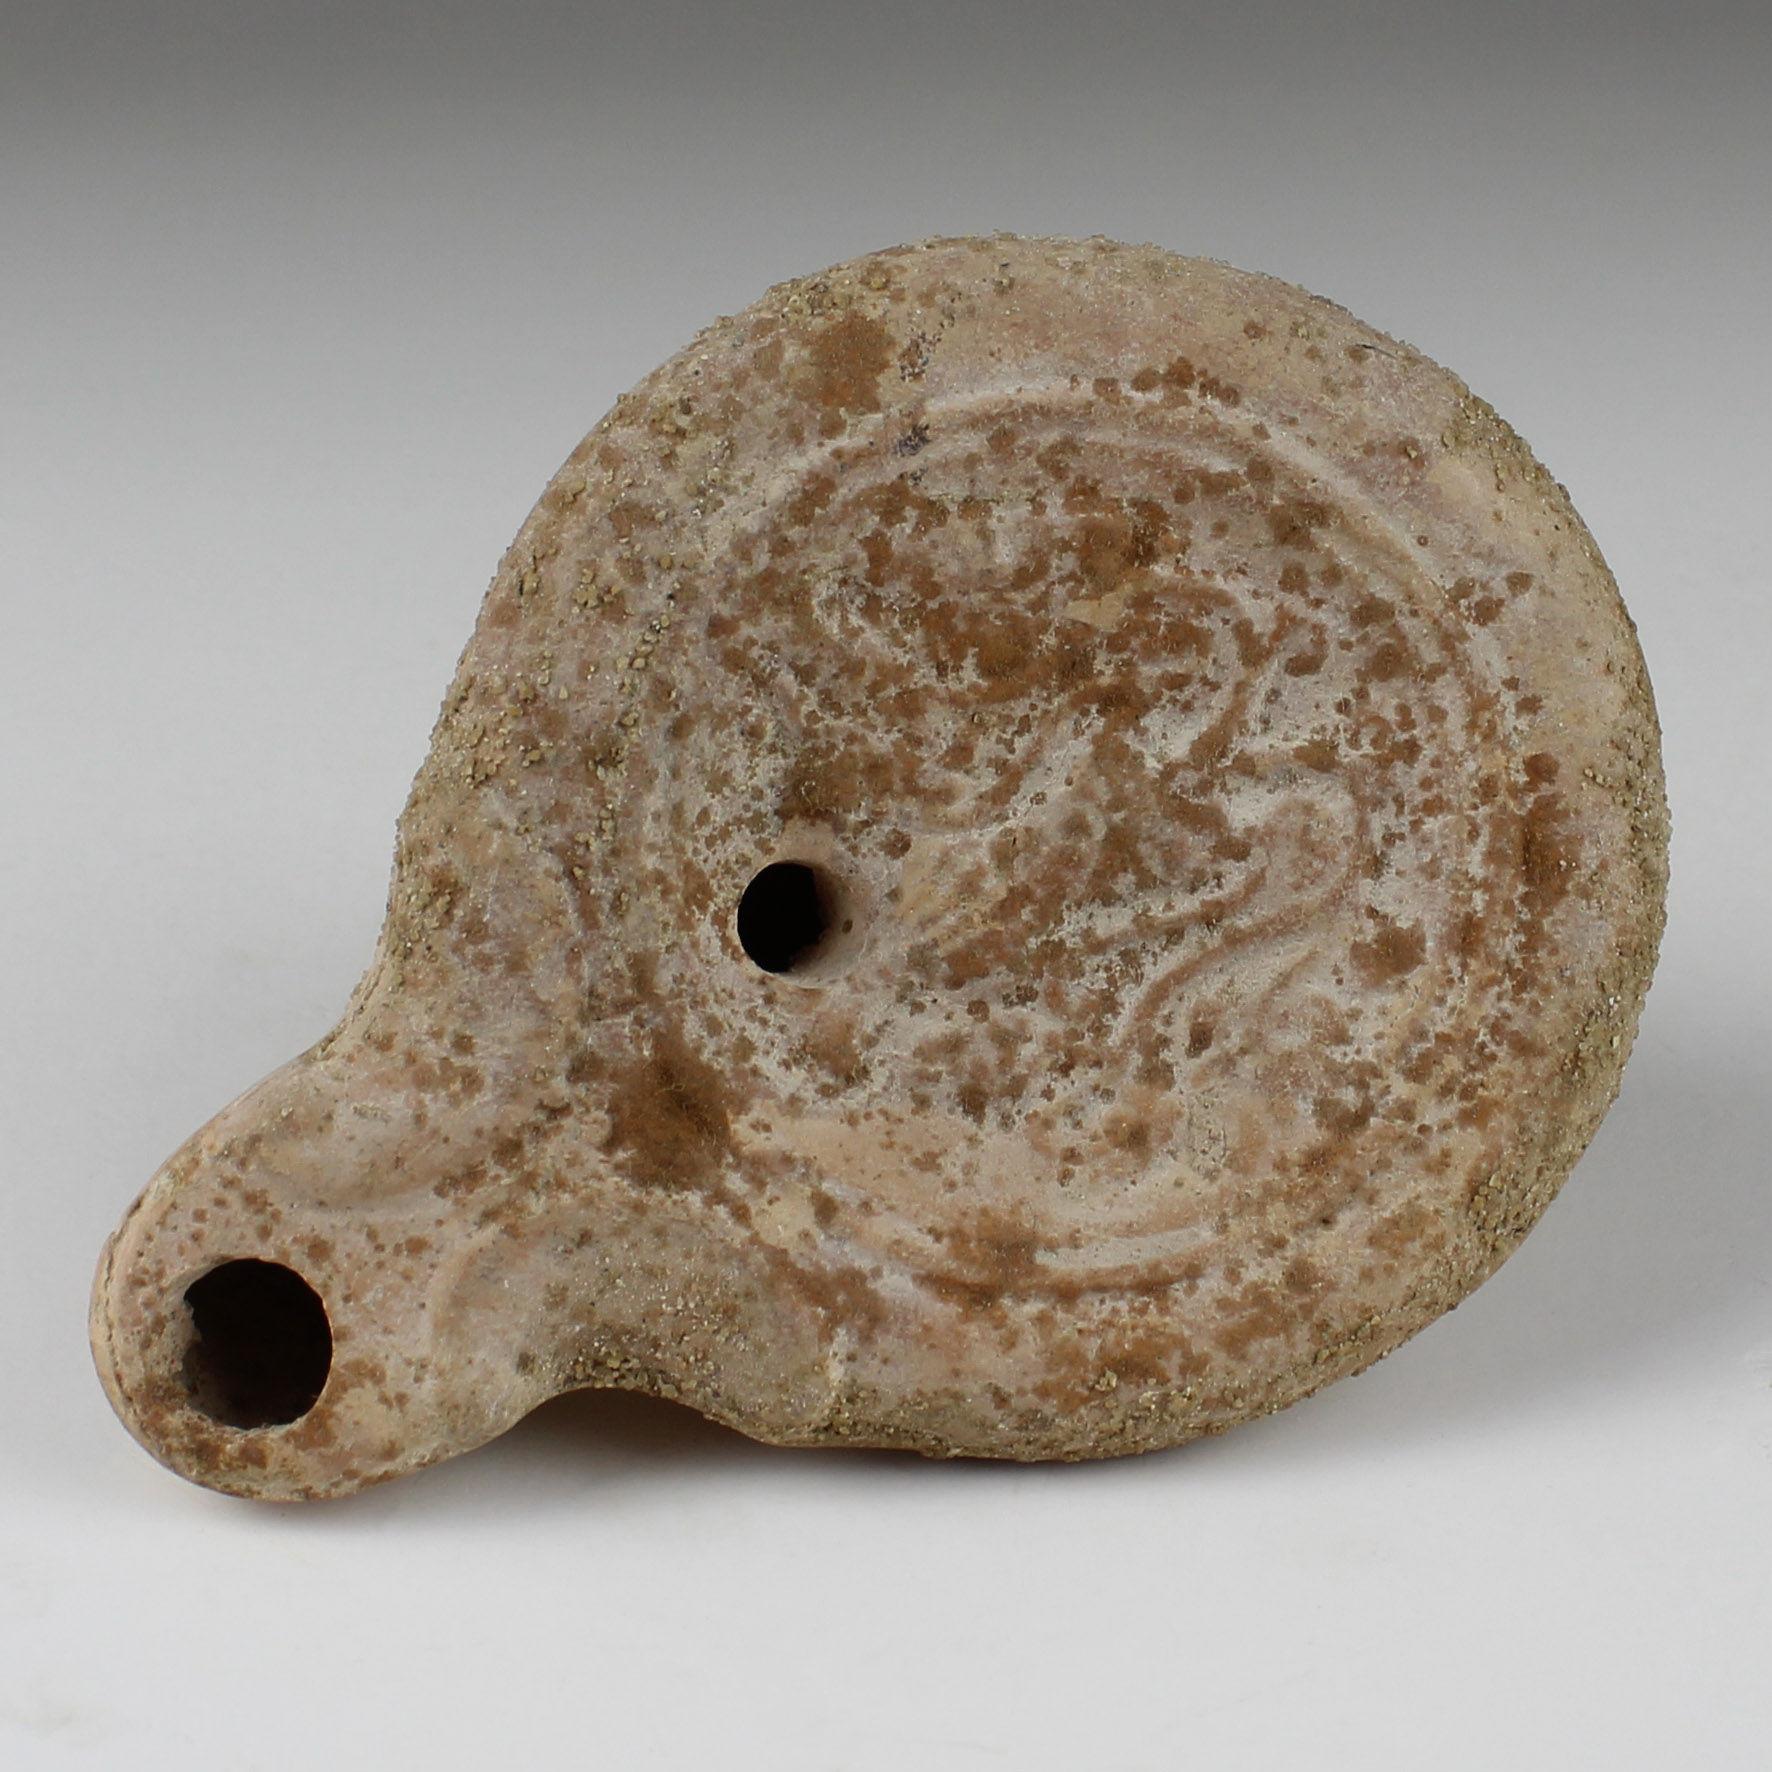 ITEM: Oil lamp with leaves and fruit, Type Bussiere B III 1
MATERIAL: Terracotta
CULTURE: Roman
PERIOD: 1st – 2nd Century A.D
DIMENSIONS: 20 mm x 65 mm x 90 mm
CONDITION: Good condition
PROVENANCE: Ex Emeritus collection (USA), collected from the